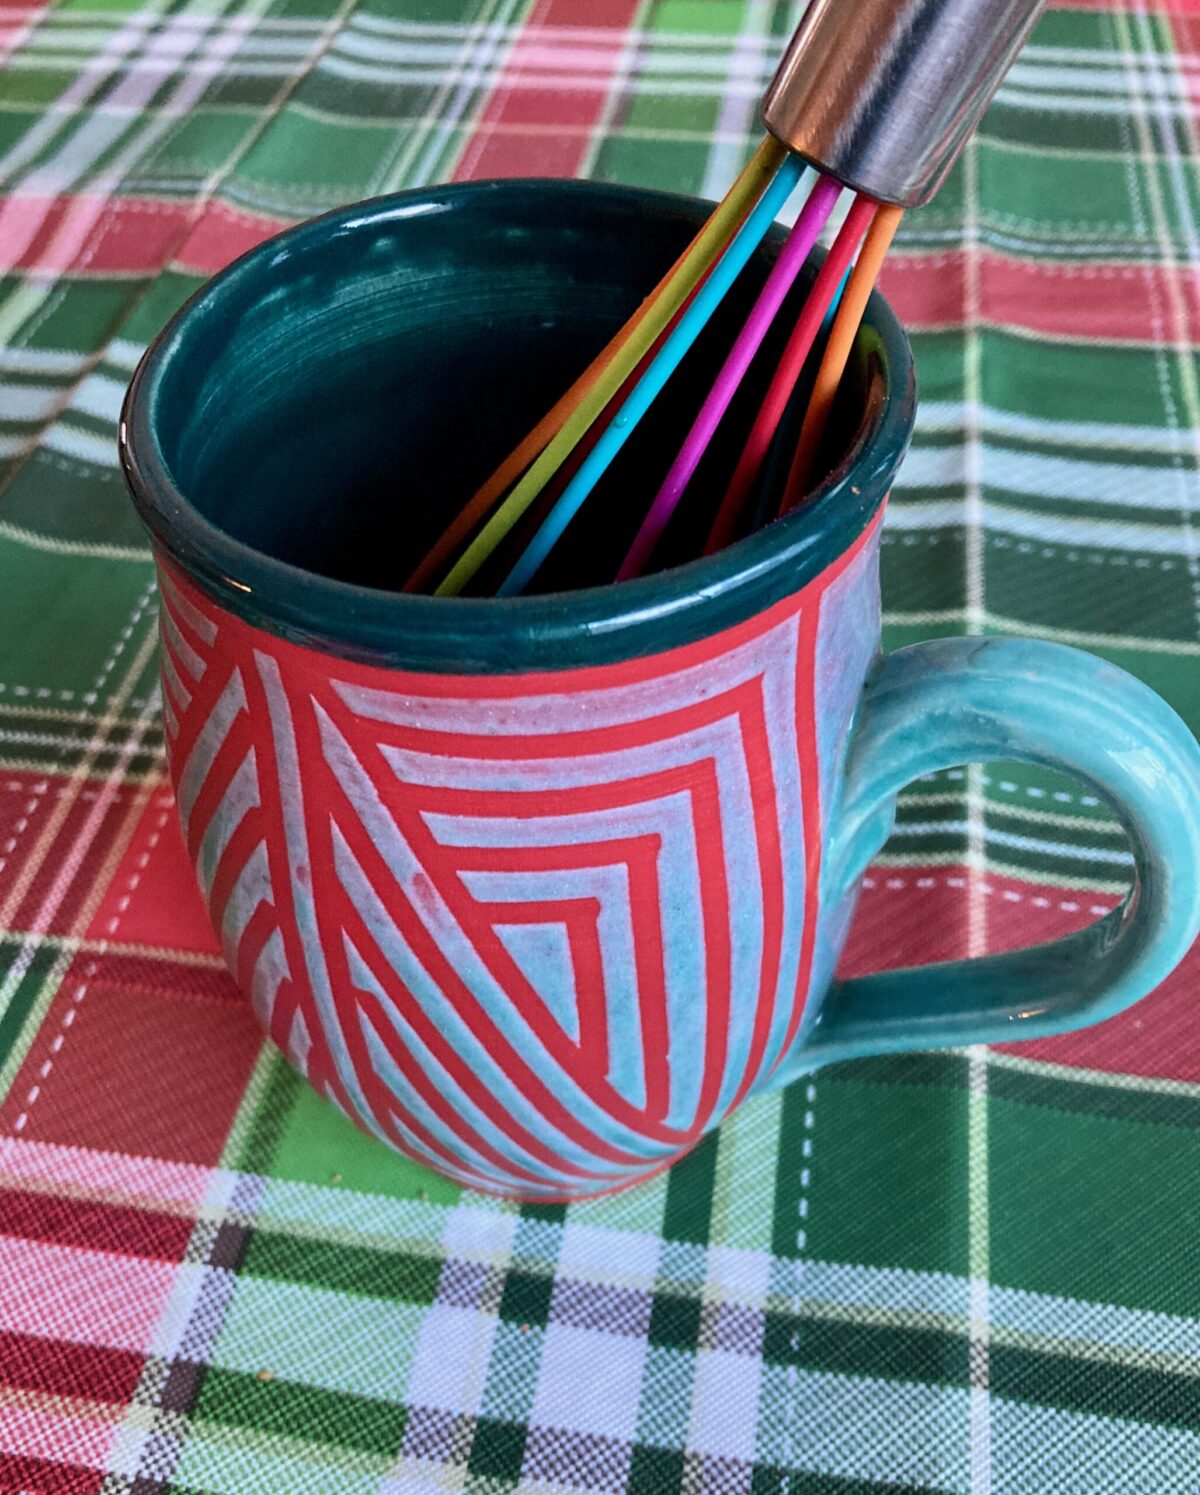 Red and green mug with wire whisk on holiday plaid tablecloth.